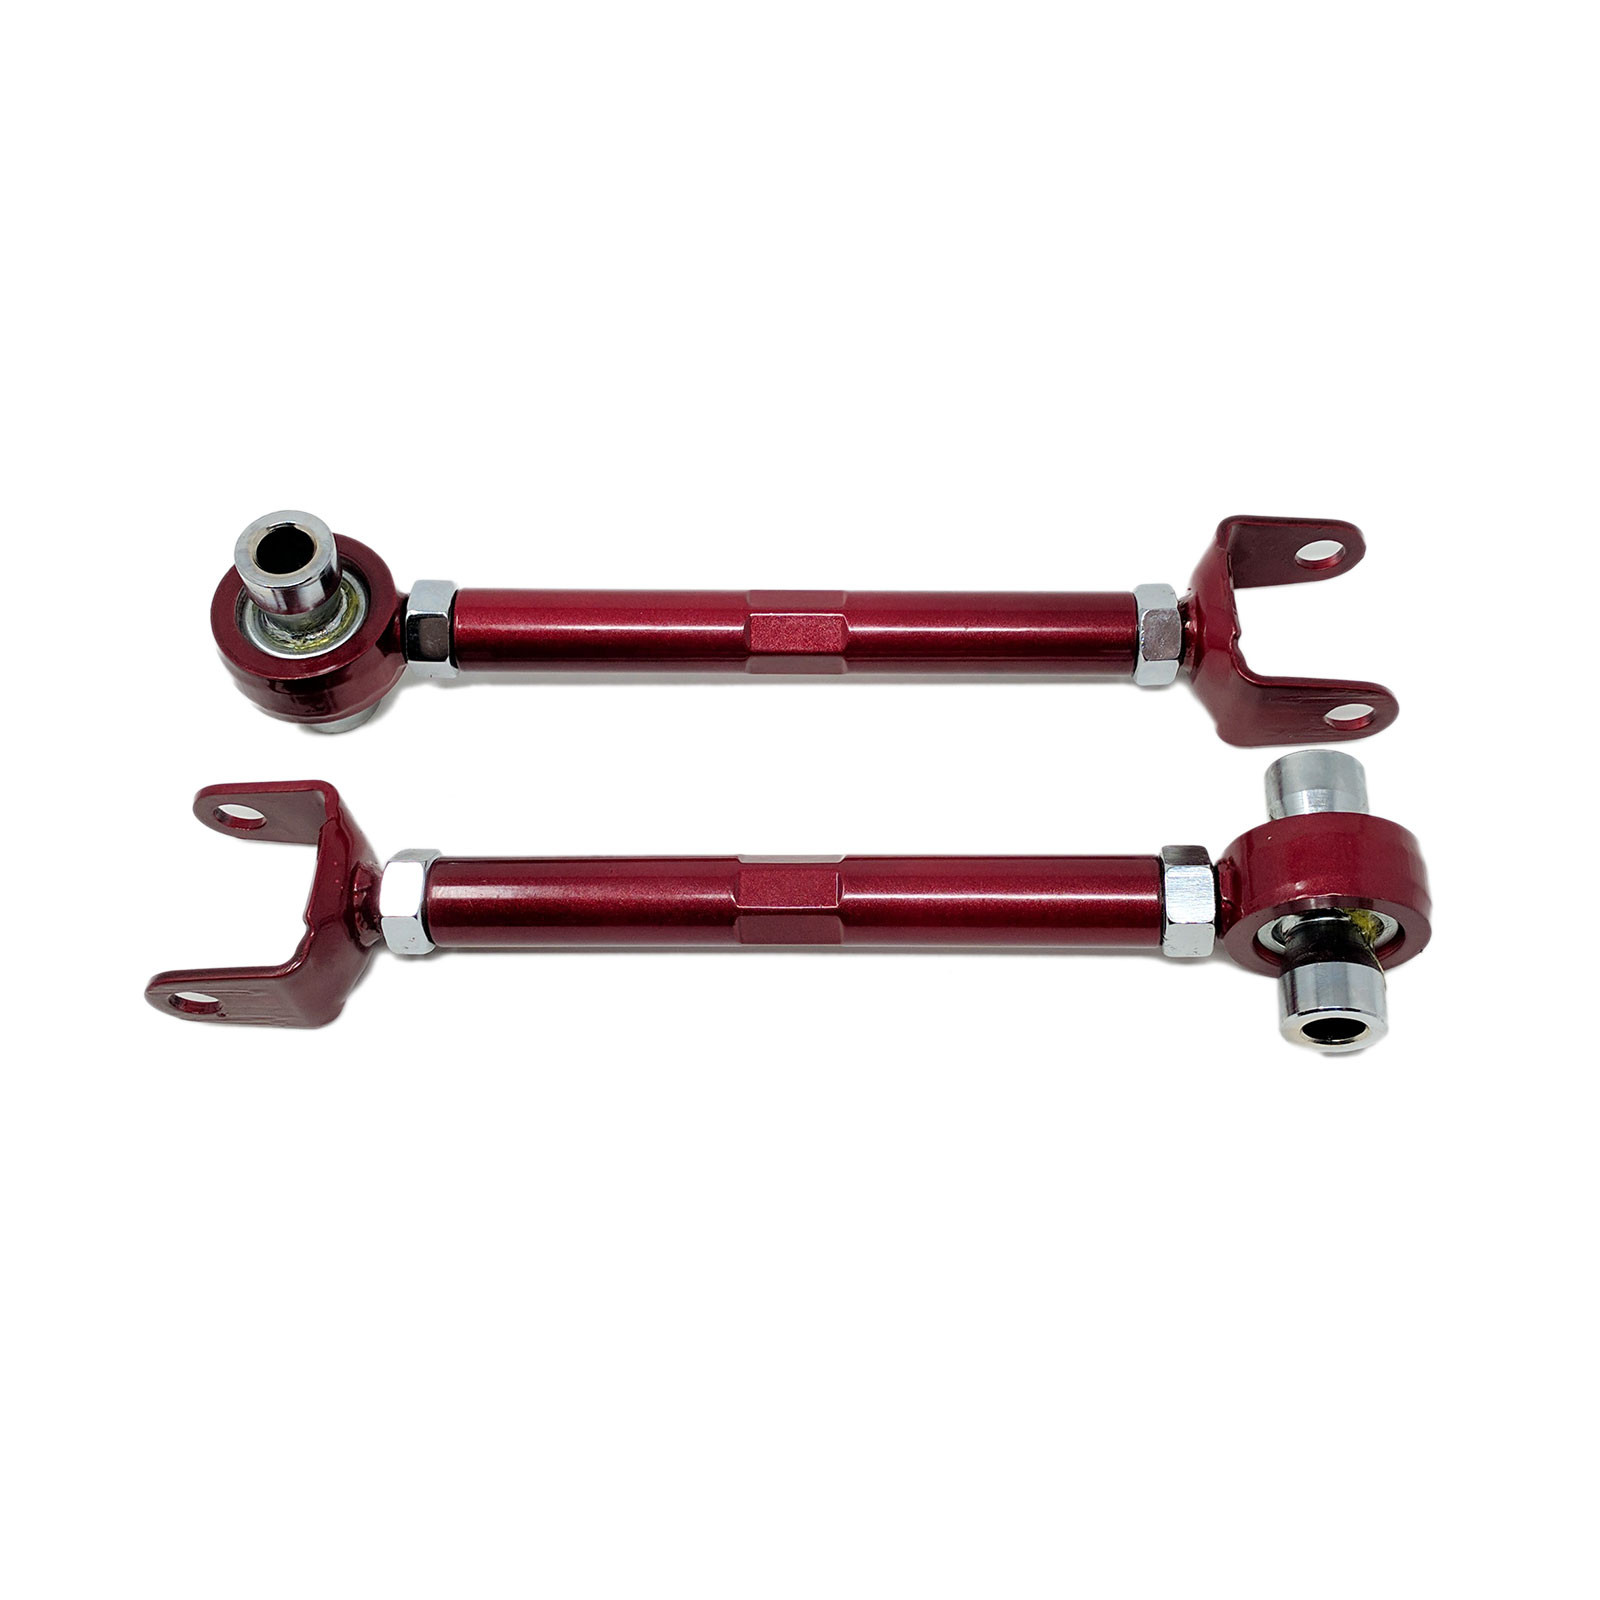 Set of 2 compatible with Mitsubishi Galant 1994-03 Godspeed AK-027-B Adjustable Camber Rear Lateral Arms 